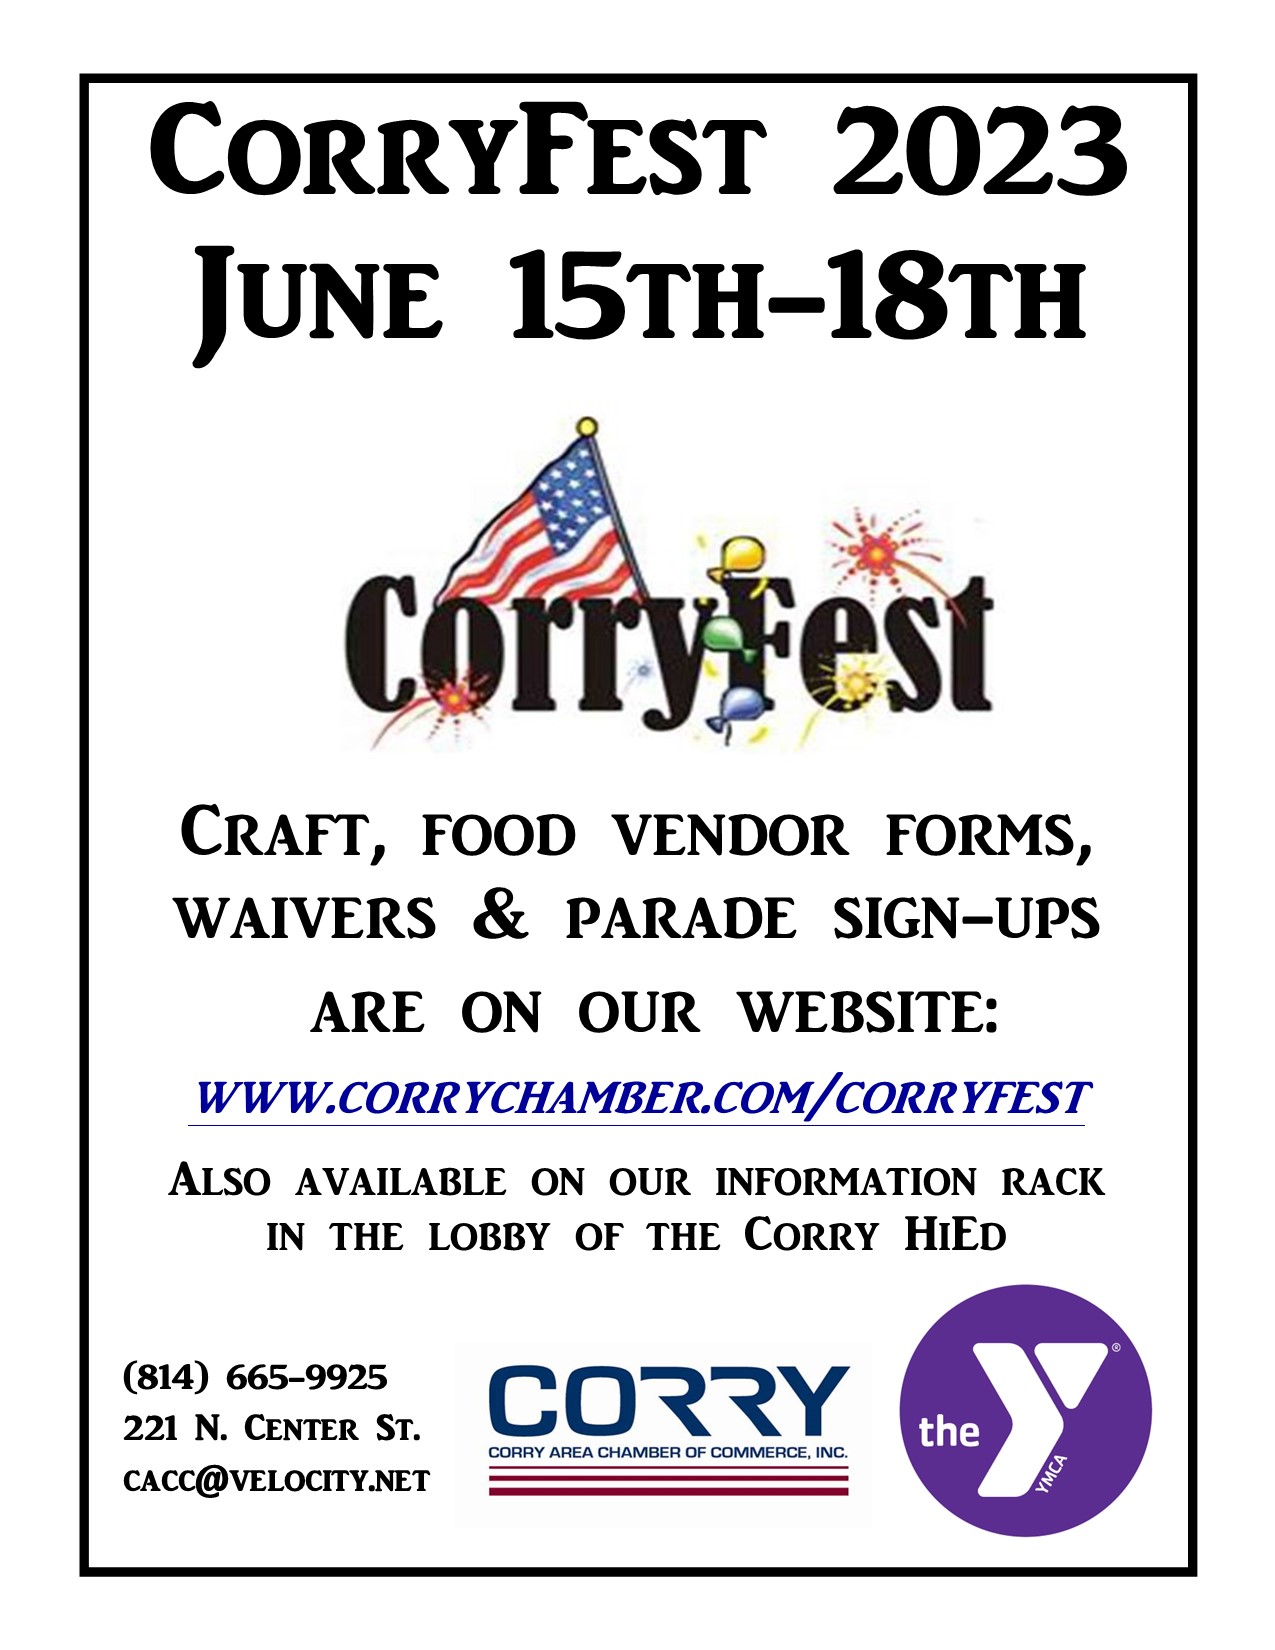 CorryFest 2023 Events Erie Reader